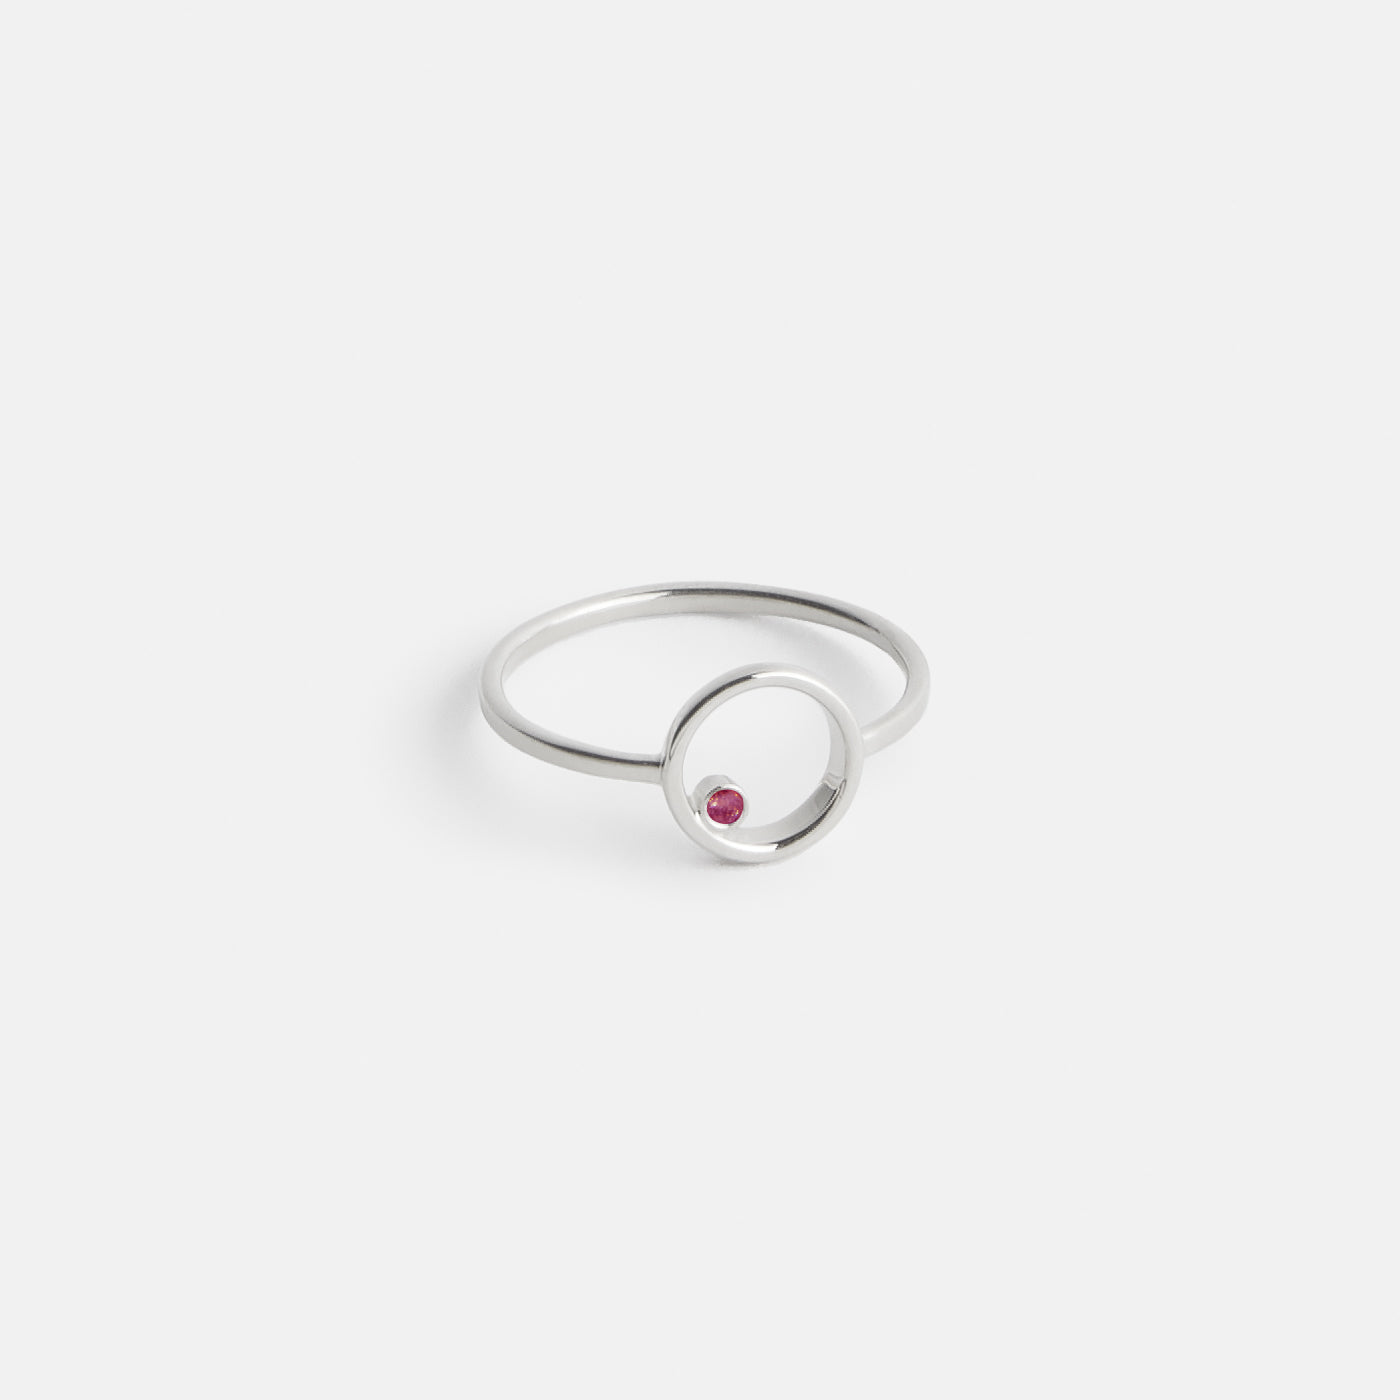 Ila Thin Ring in Sterling Silver set with Ruby by SHW Fine Jewelry New York City